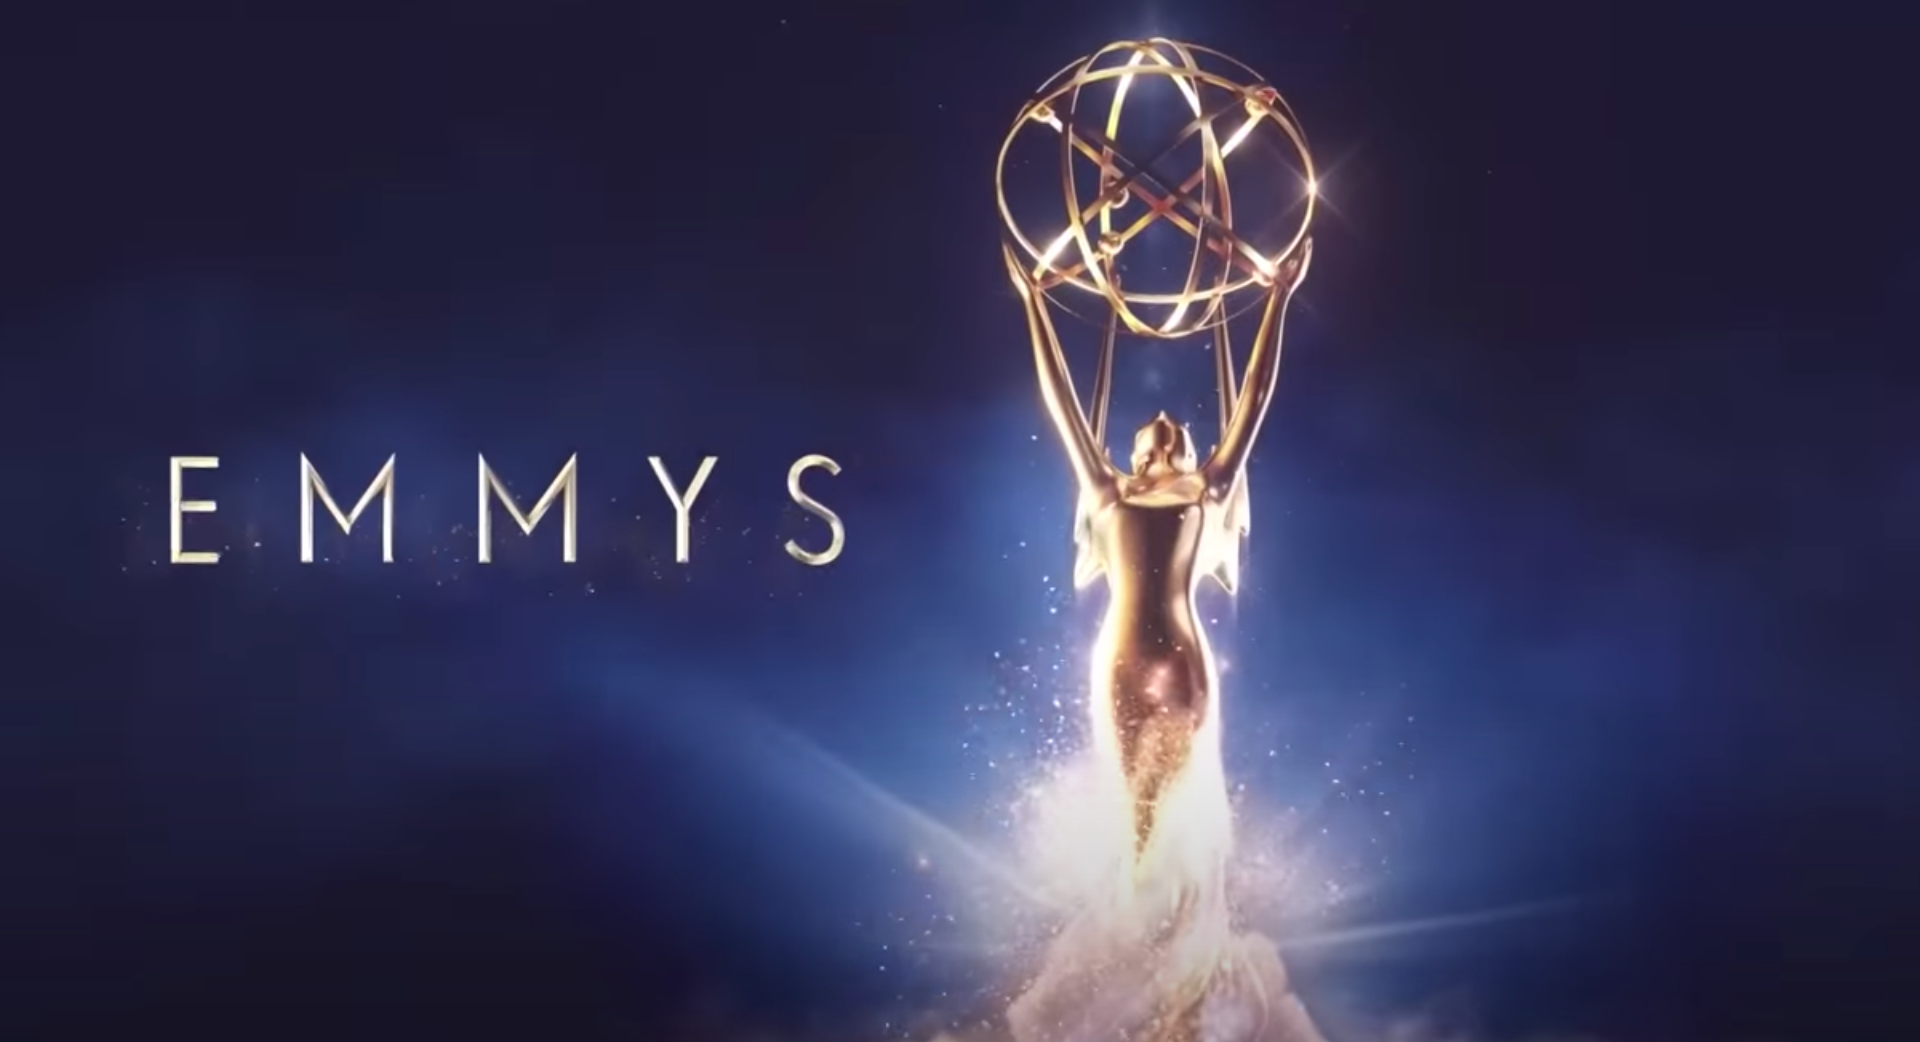 Emmys | Television Academy